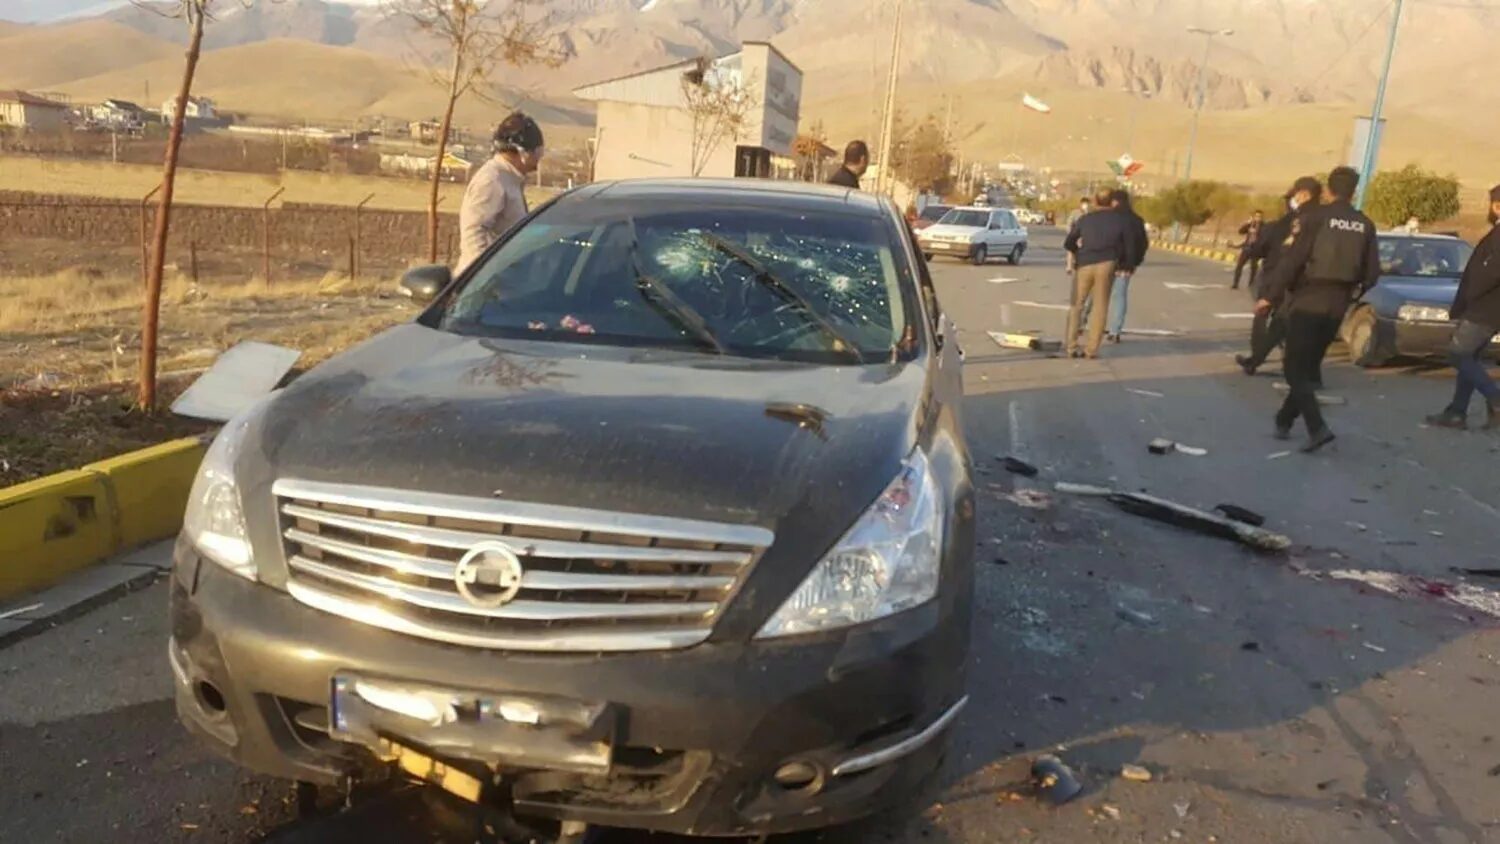 scene of the attack that killed Prominent Iranian scientist